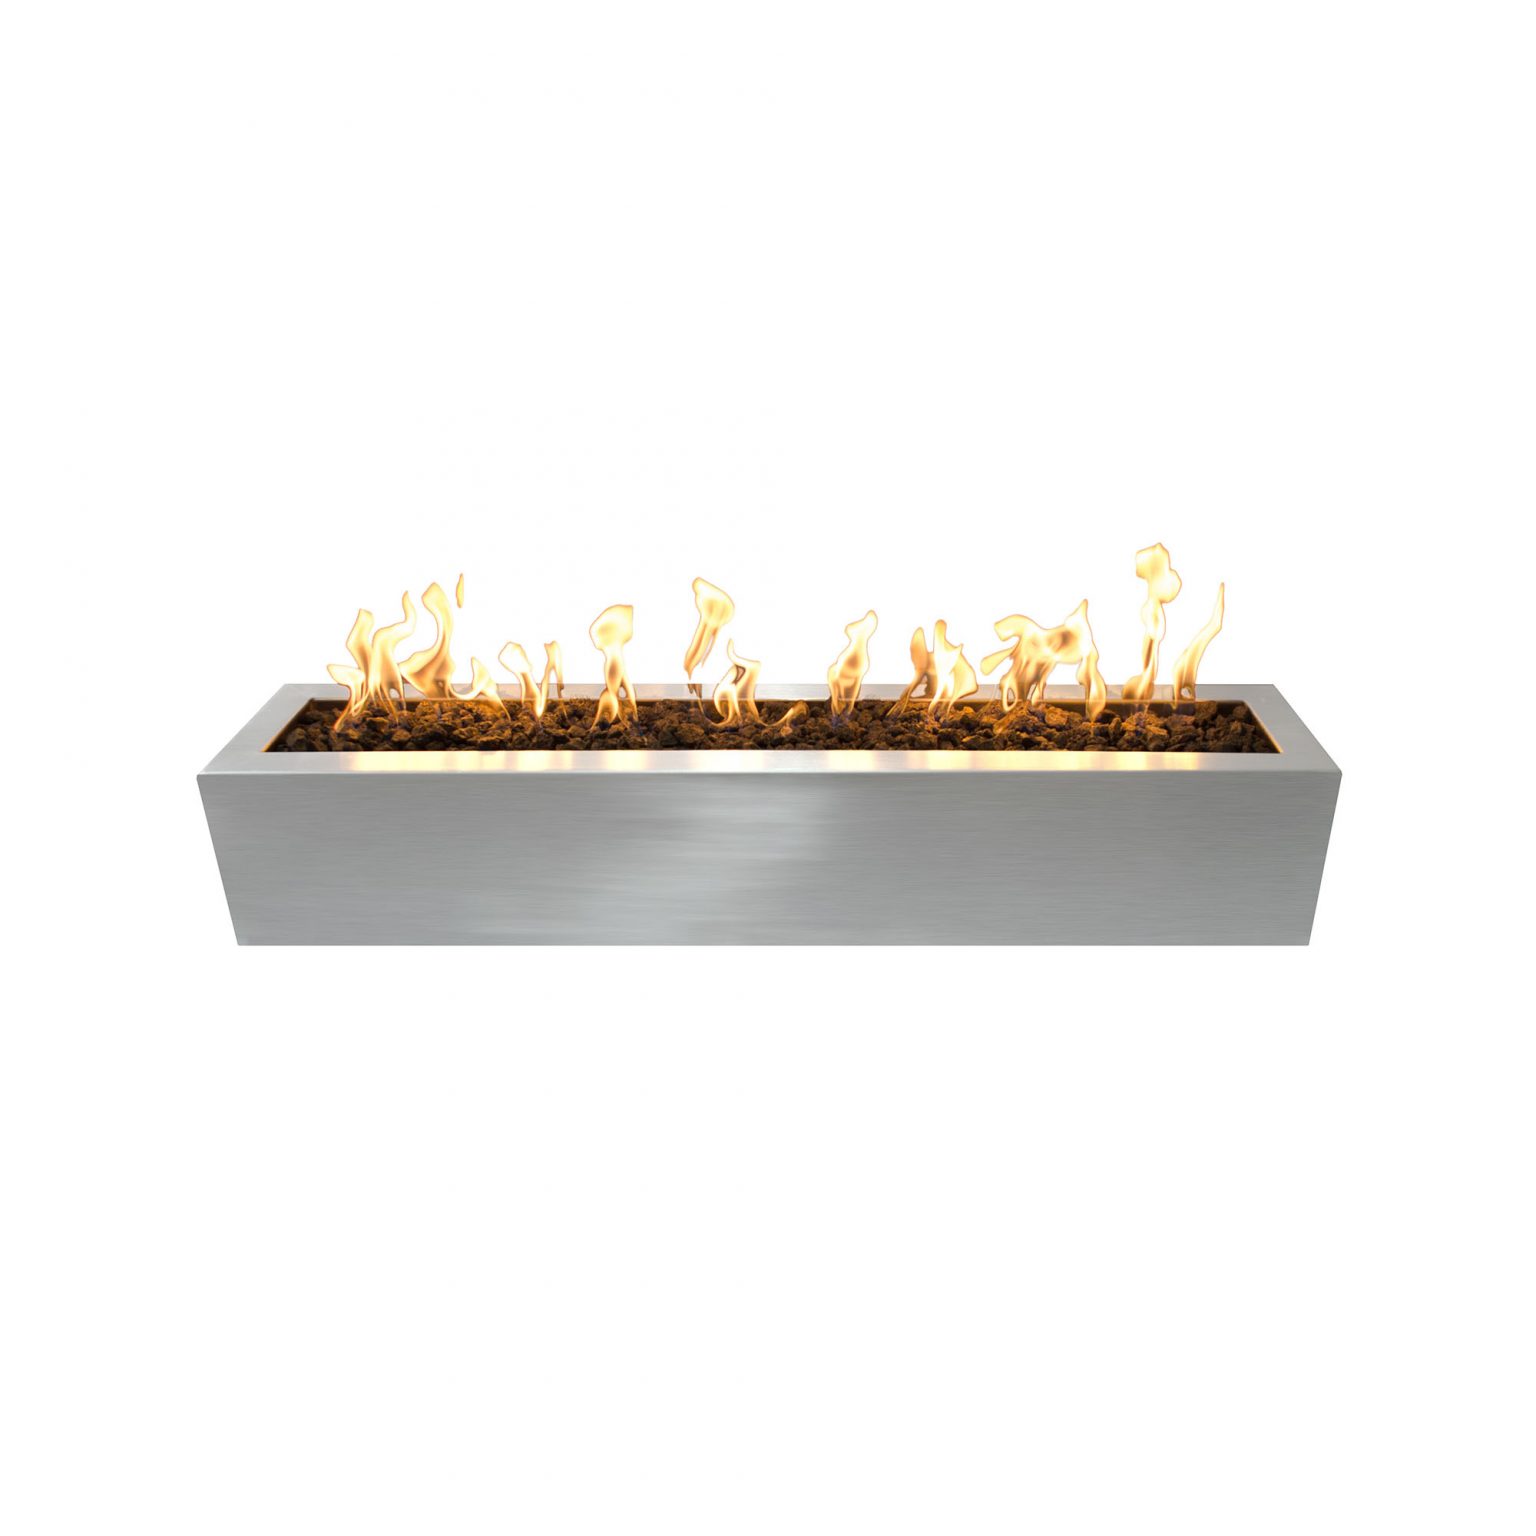 Gas Fire Table the "Eaves" in Stainless Steel - The Outdoor Plus (TOP Ignition Options: Match Lit Ignition, TOP Fire Table Sizes: 48 x 10 inches)